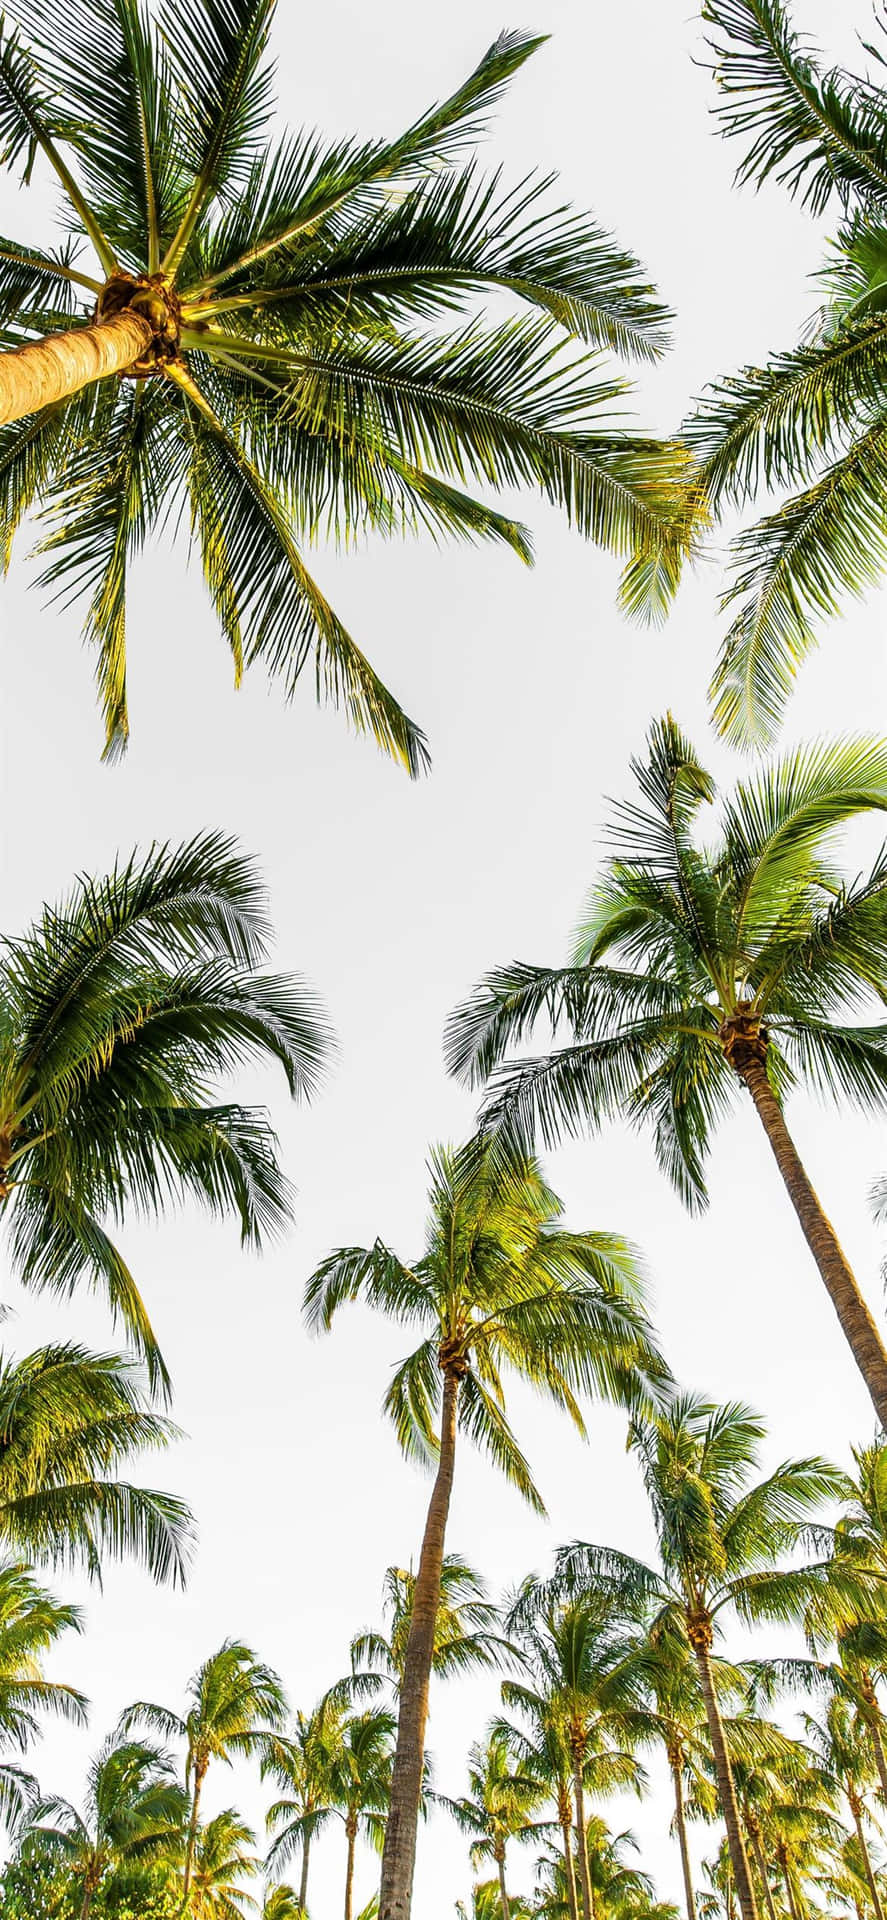 Enjoy a tropical vibe with this Palm Tree Iphone wallpaper Wallpaper